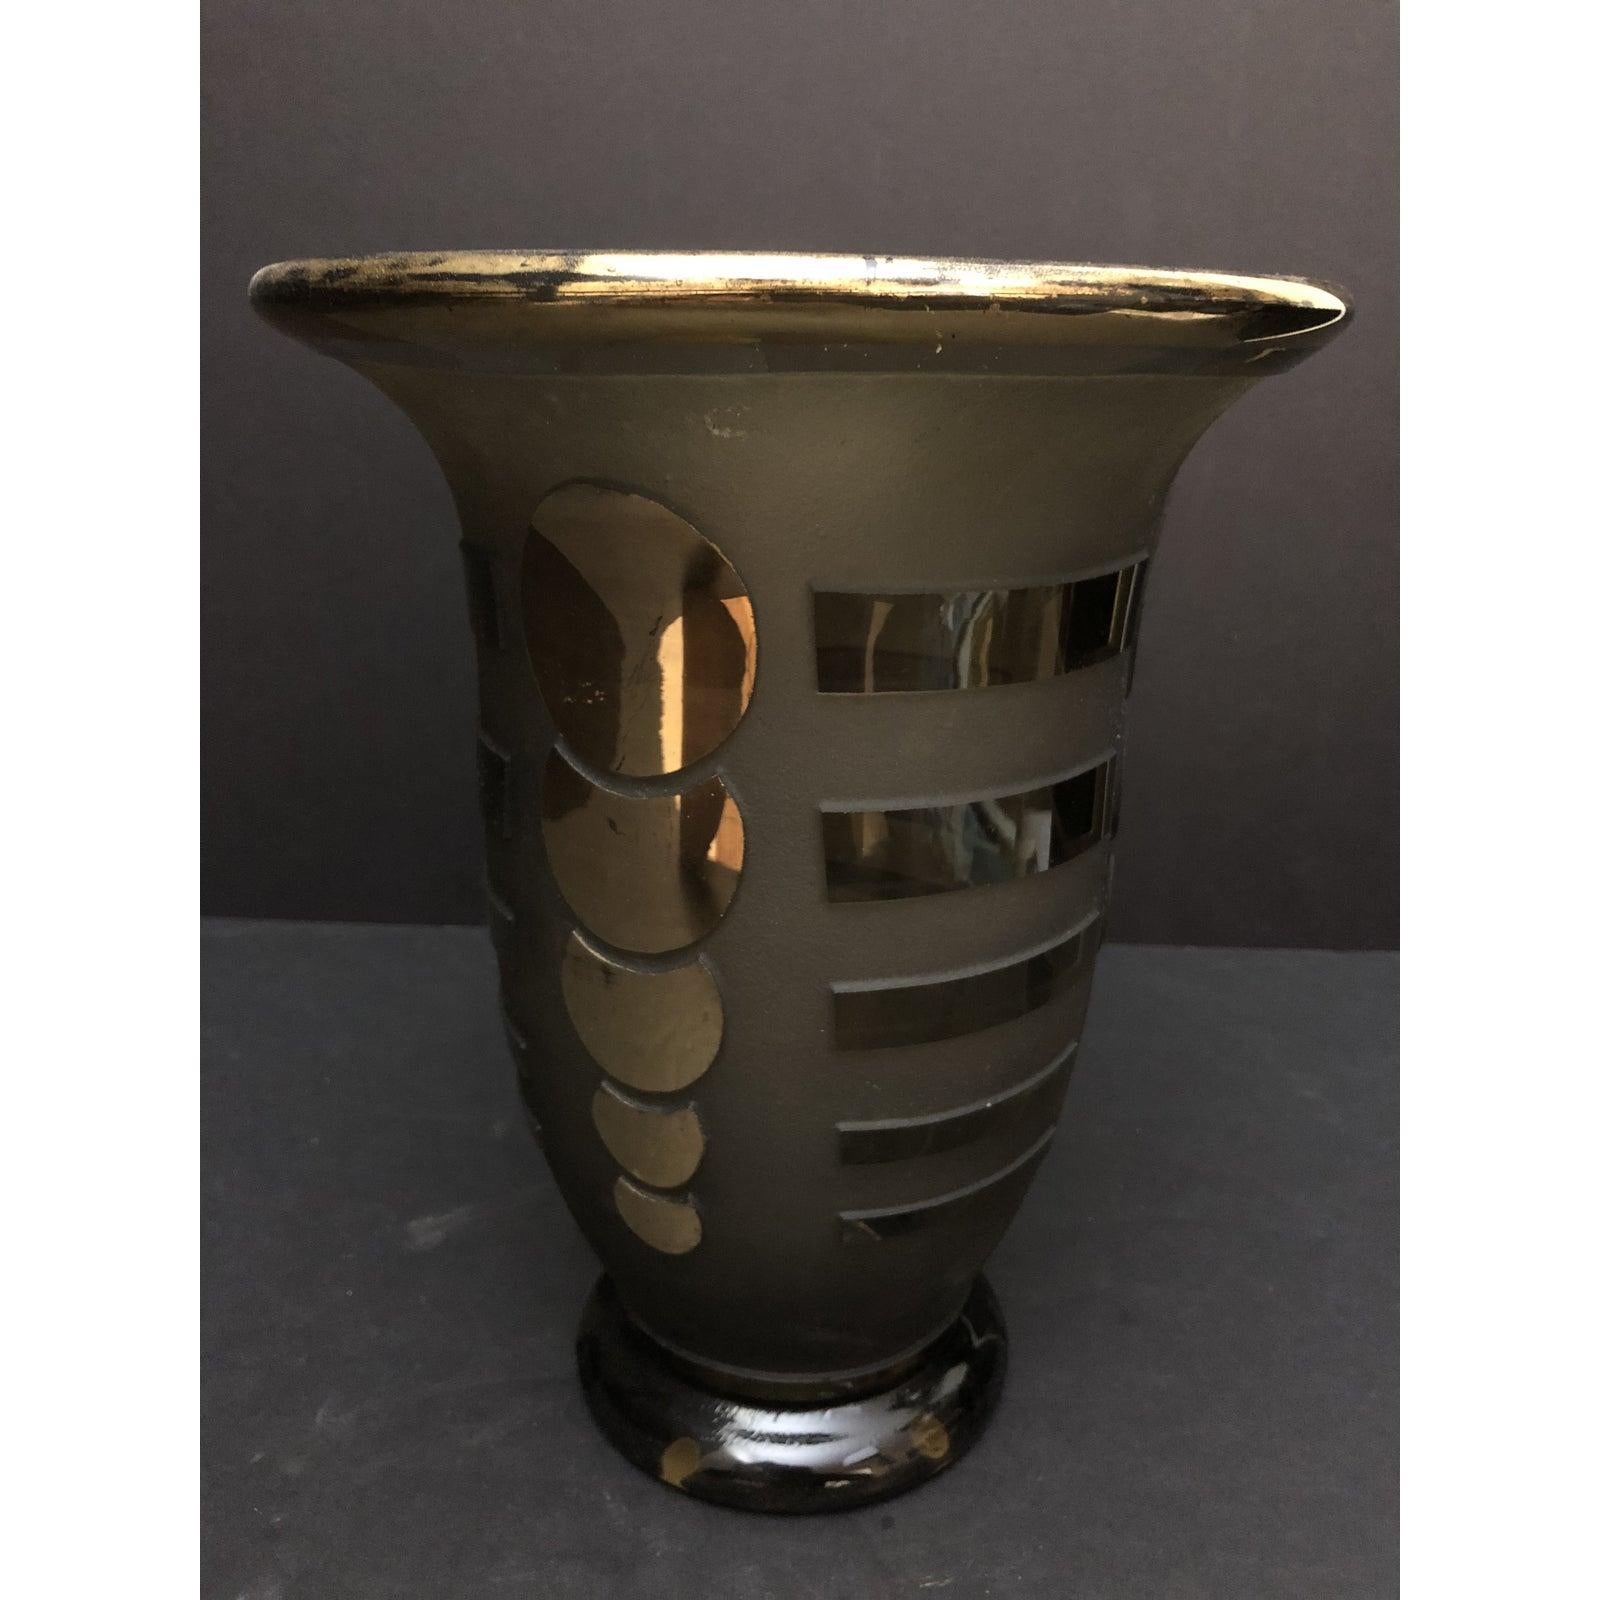 Daum Nancy Deep Cut Art Deco Glass Vase. Rare and unusual signed geometric pattern heavily acid cut and gilt vase. Textured and smooth surface. The color is a smoky grey green amber.